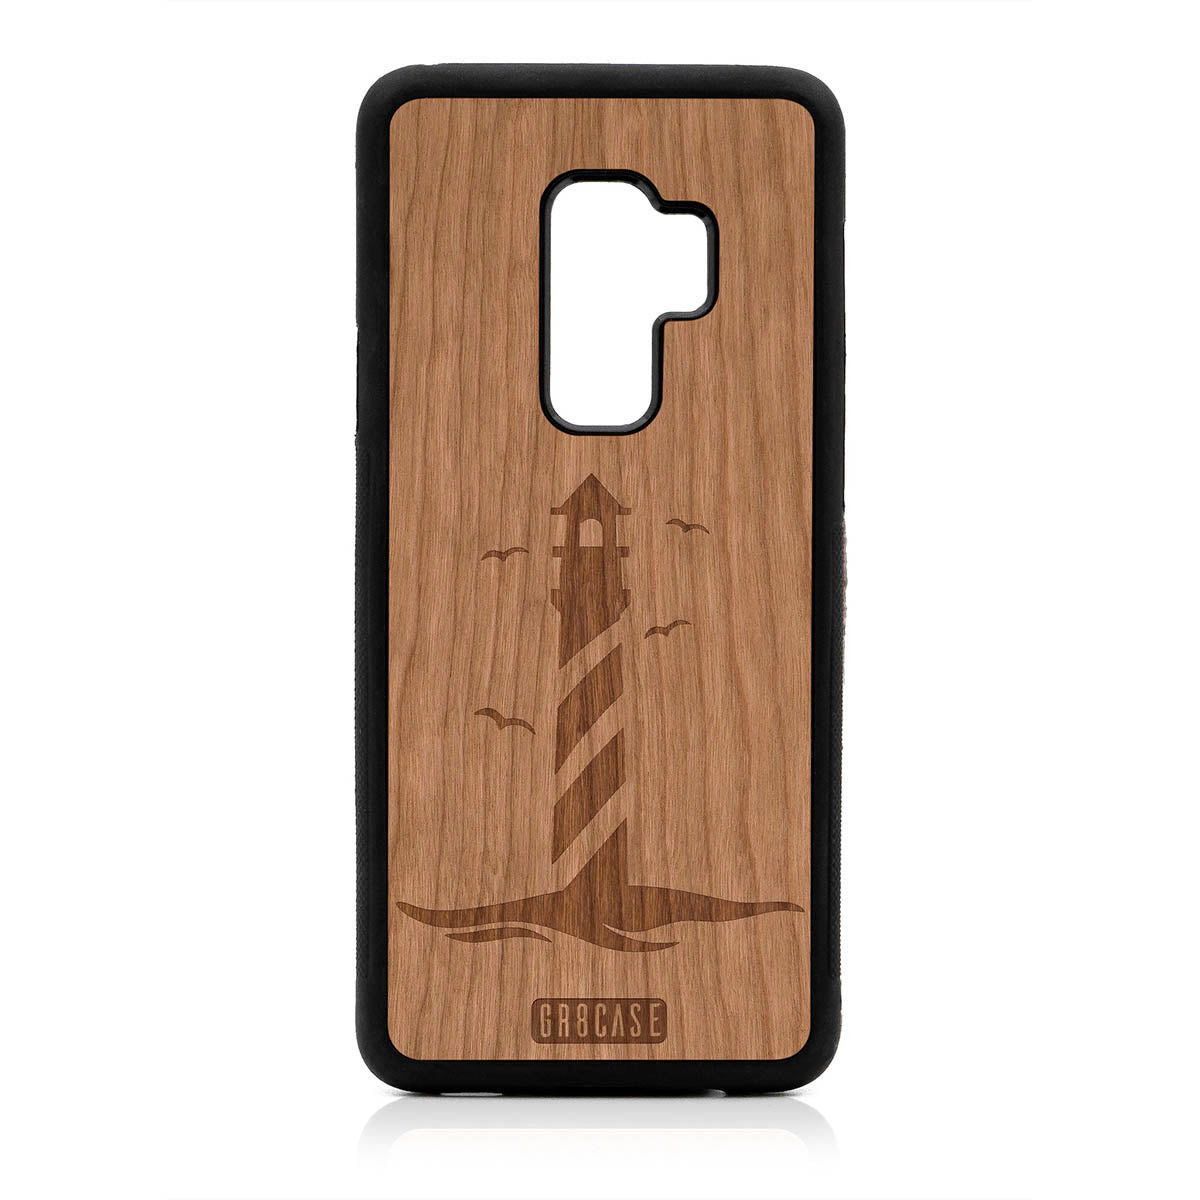 Lighthouse Design Wood Case For Samsung Galaxy S9 Plus